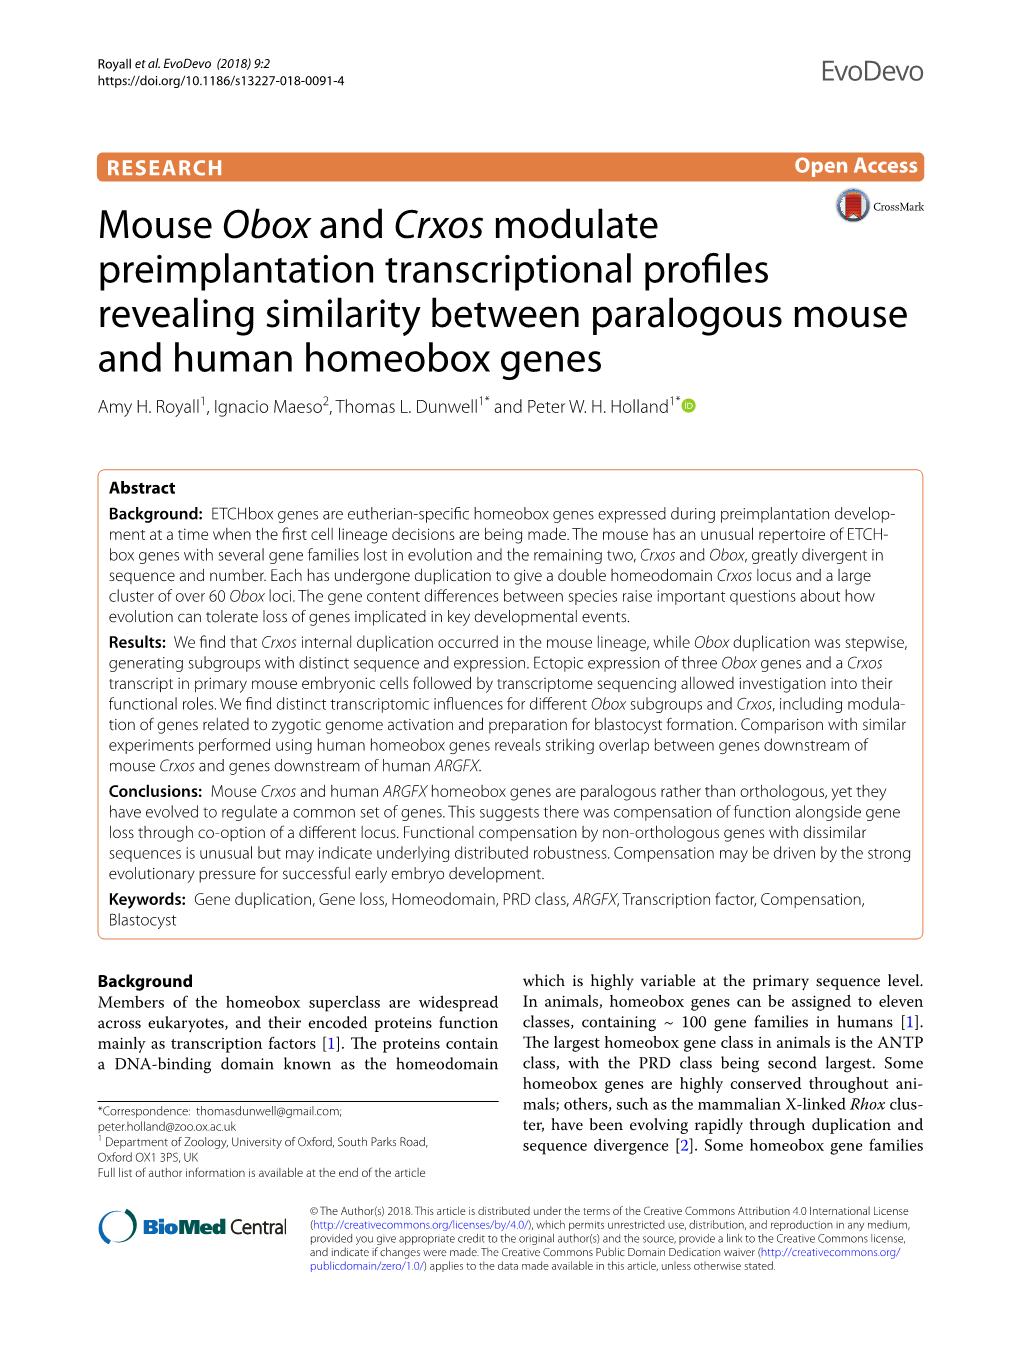 Mouse Obox and Crxos Modulate Preimplantation Transcriptional Profles Revealing Similarity Between Paralogous Mouse and Human Homeobox Genes Amy H